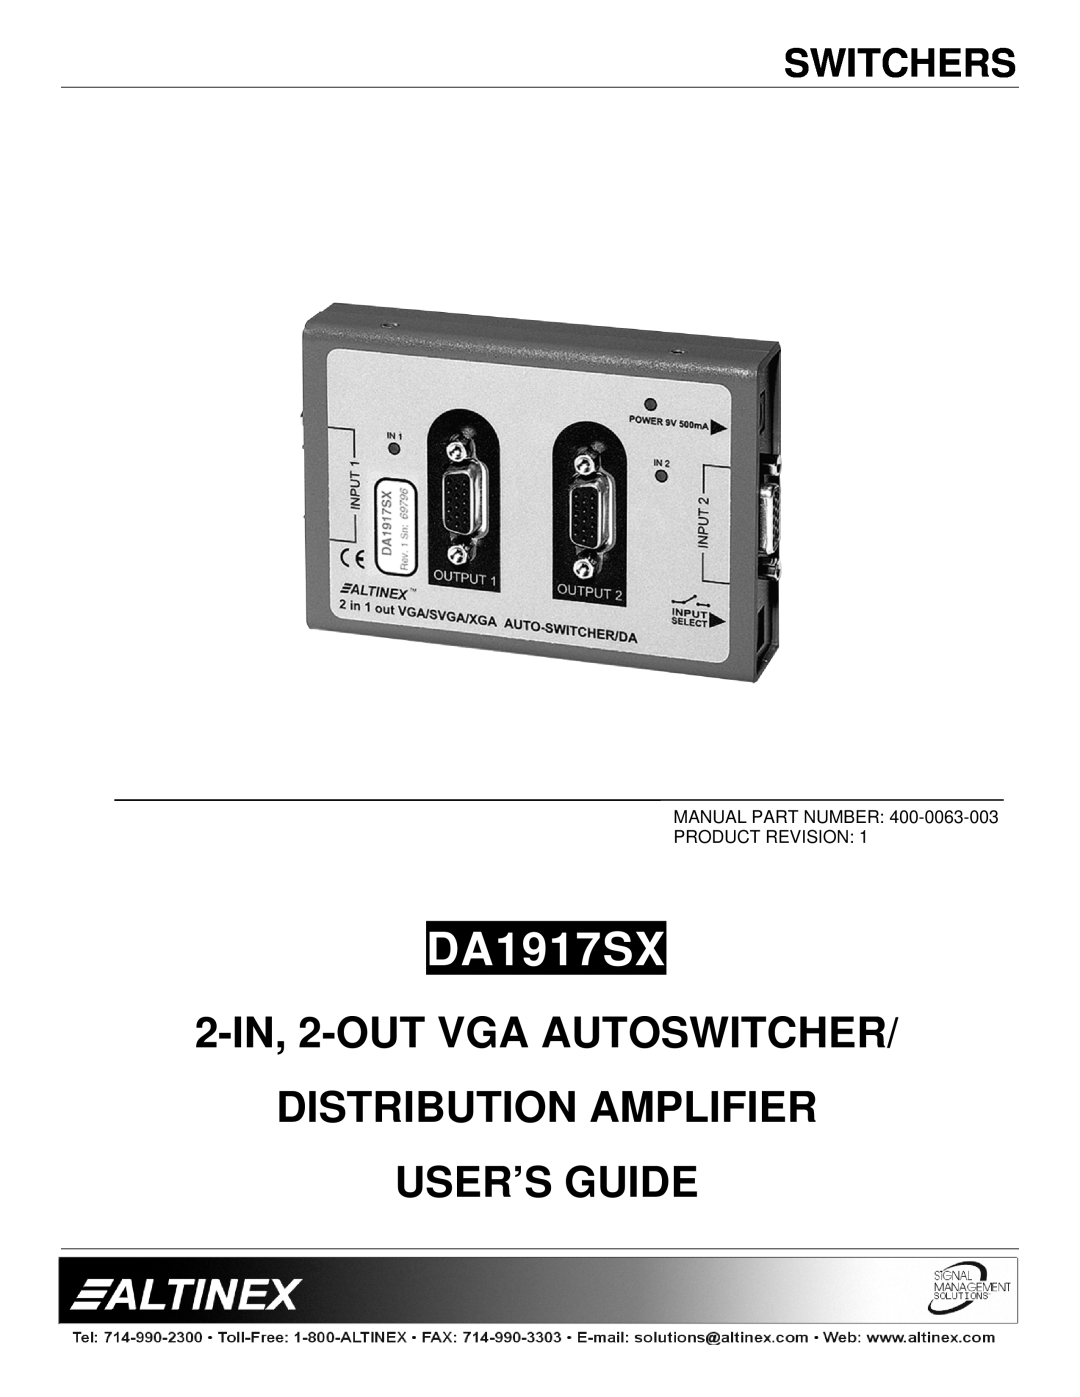 Altinex DA1917SX manual Switchers, 2-IN, 2-OUT VGA AUTOSWITCHER DISTRIBUTION AMPLIFIER USER’S GUIDE 